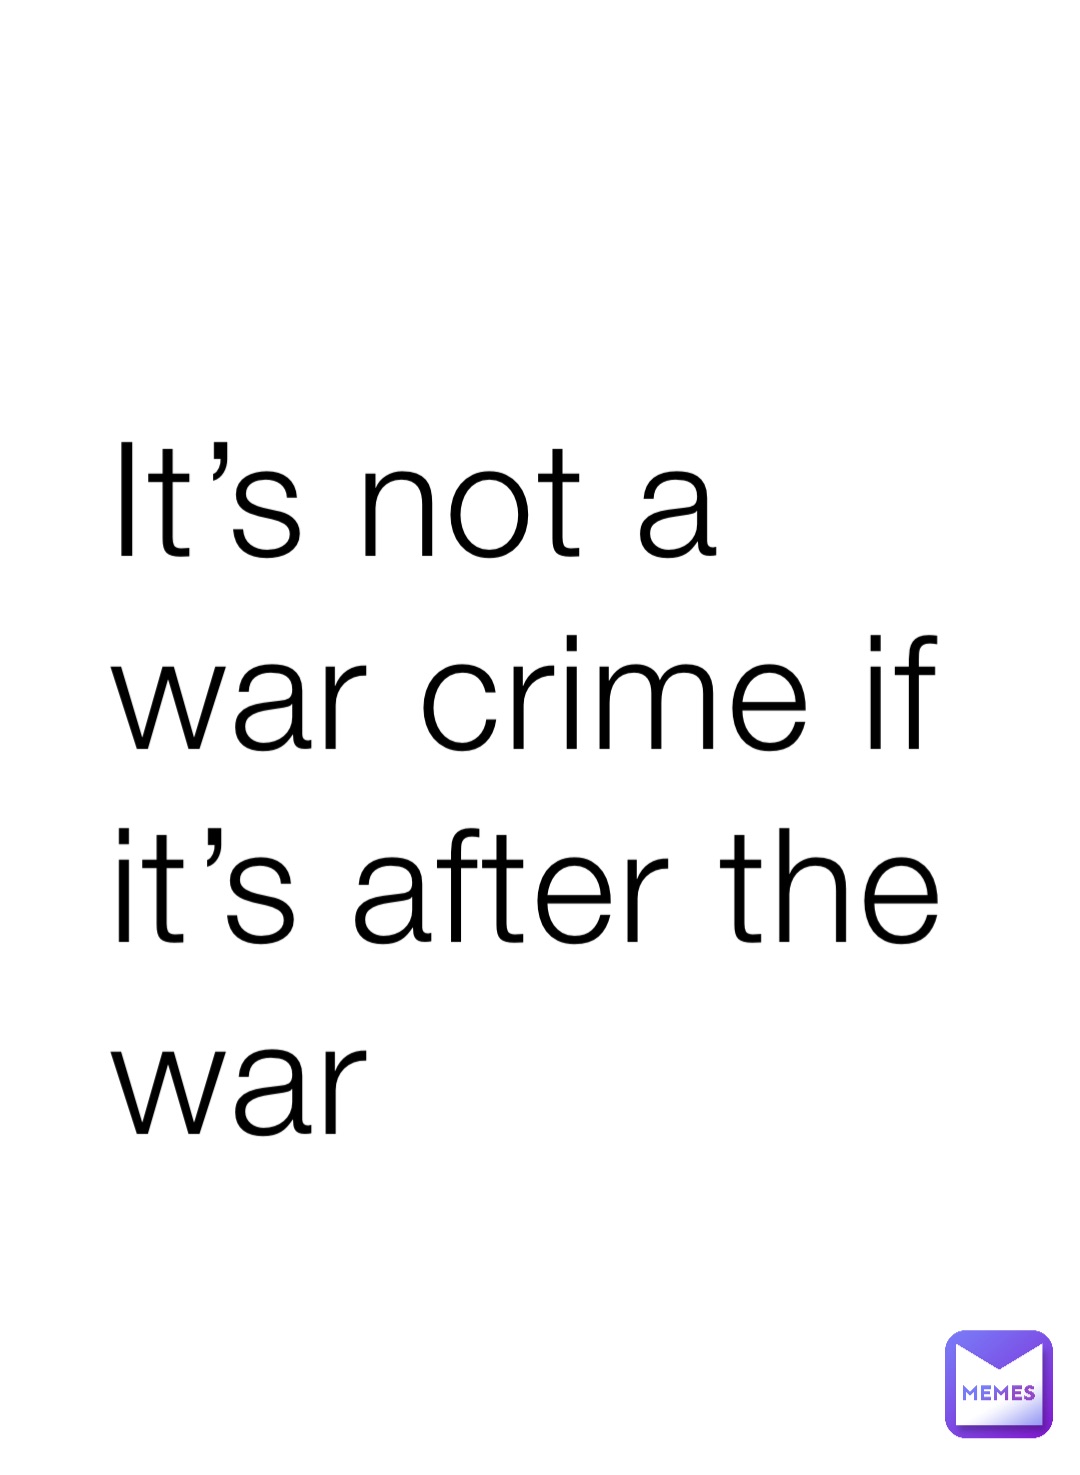 It’s not a war crime if it’s after the war